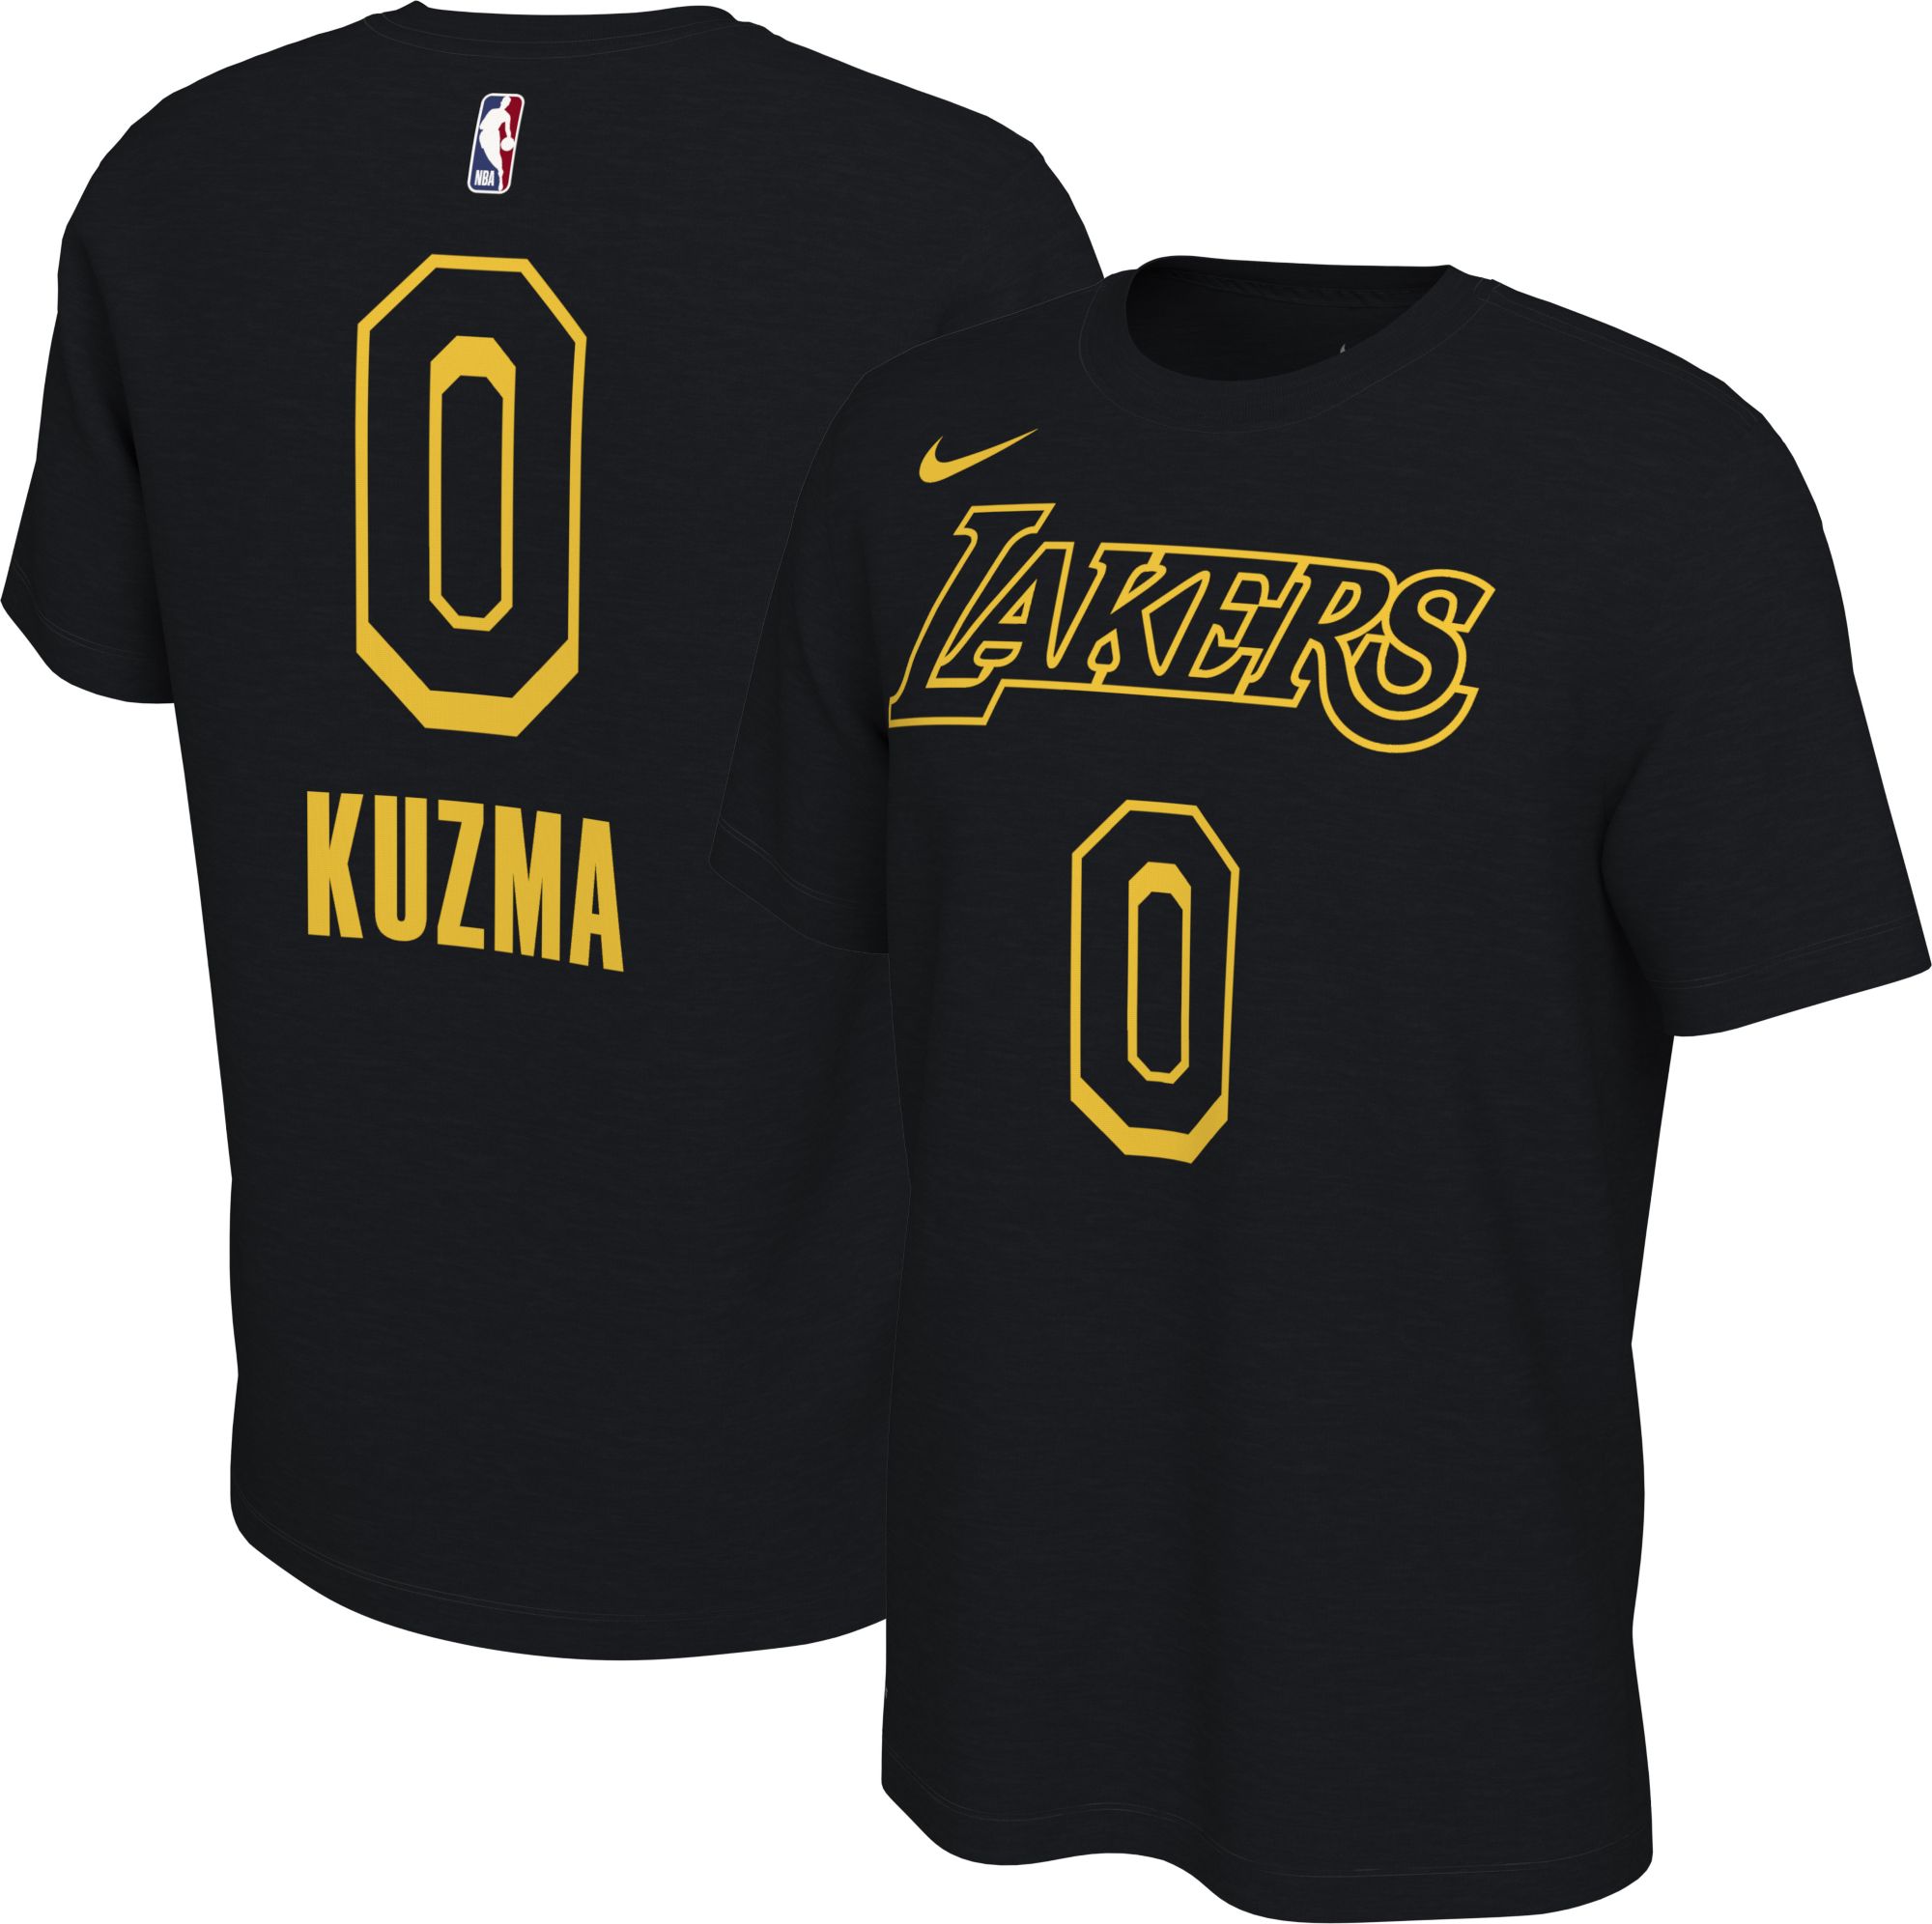 lakers clothes for kids